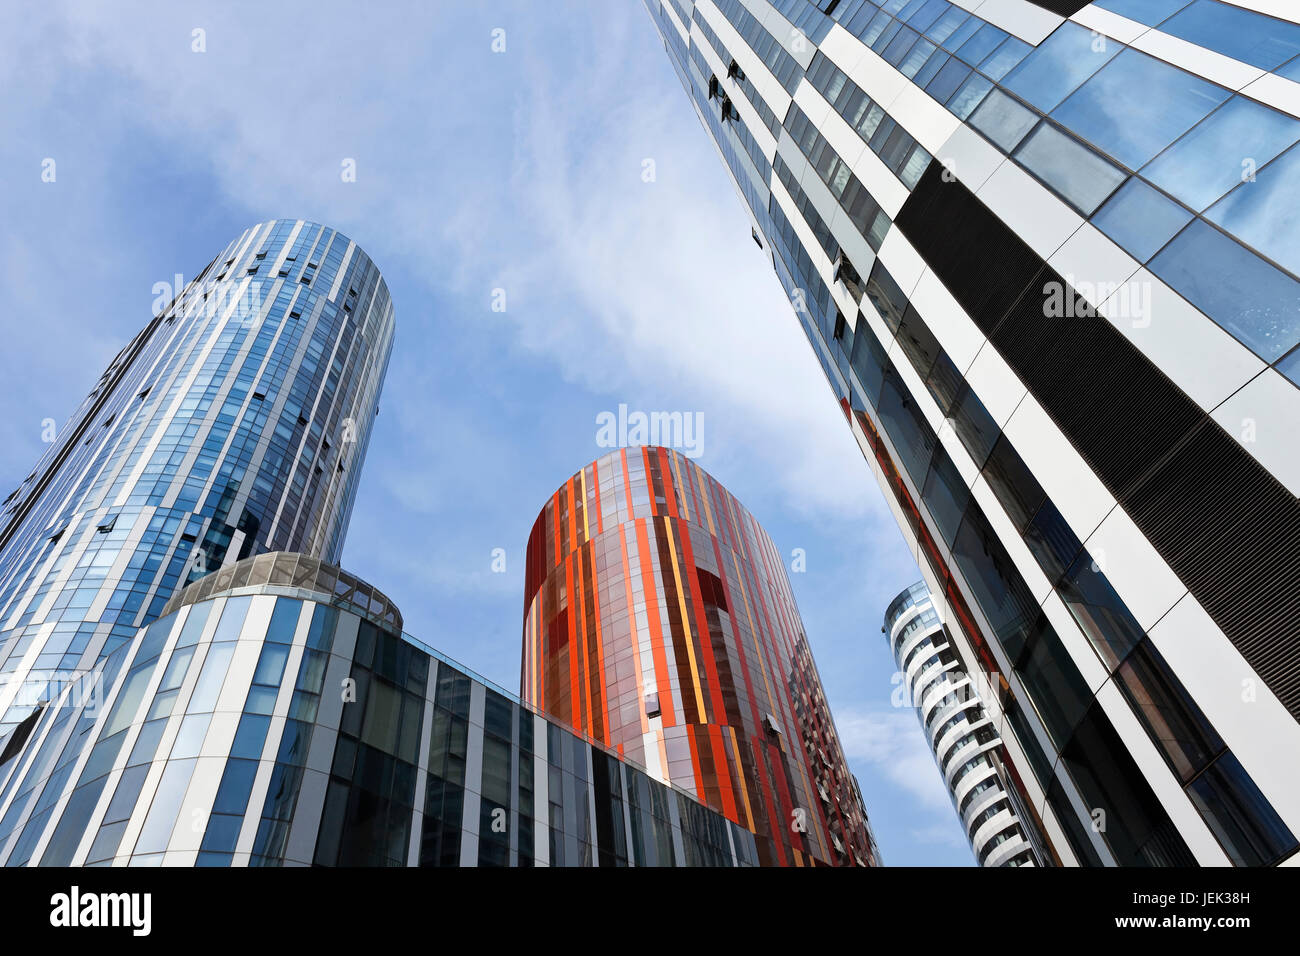 SOHO Sanlitun office and shopping area  in Beijing. SOHO Sanlitun is a new mixed commercial and residential area with iconic architecture. Stock Photo